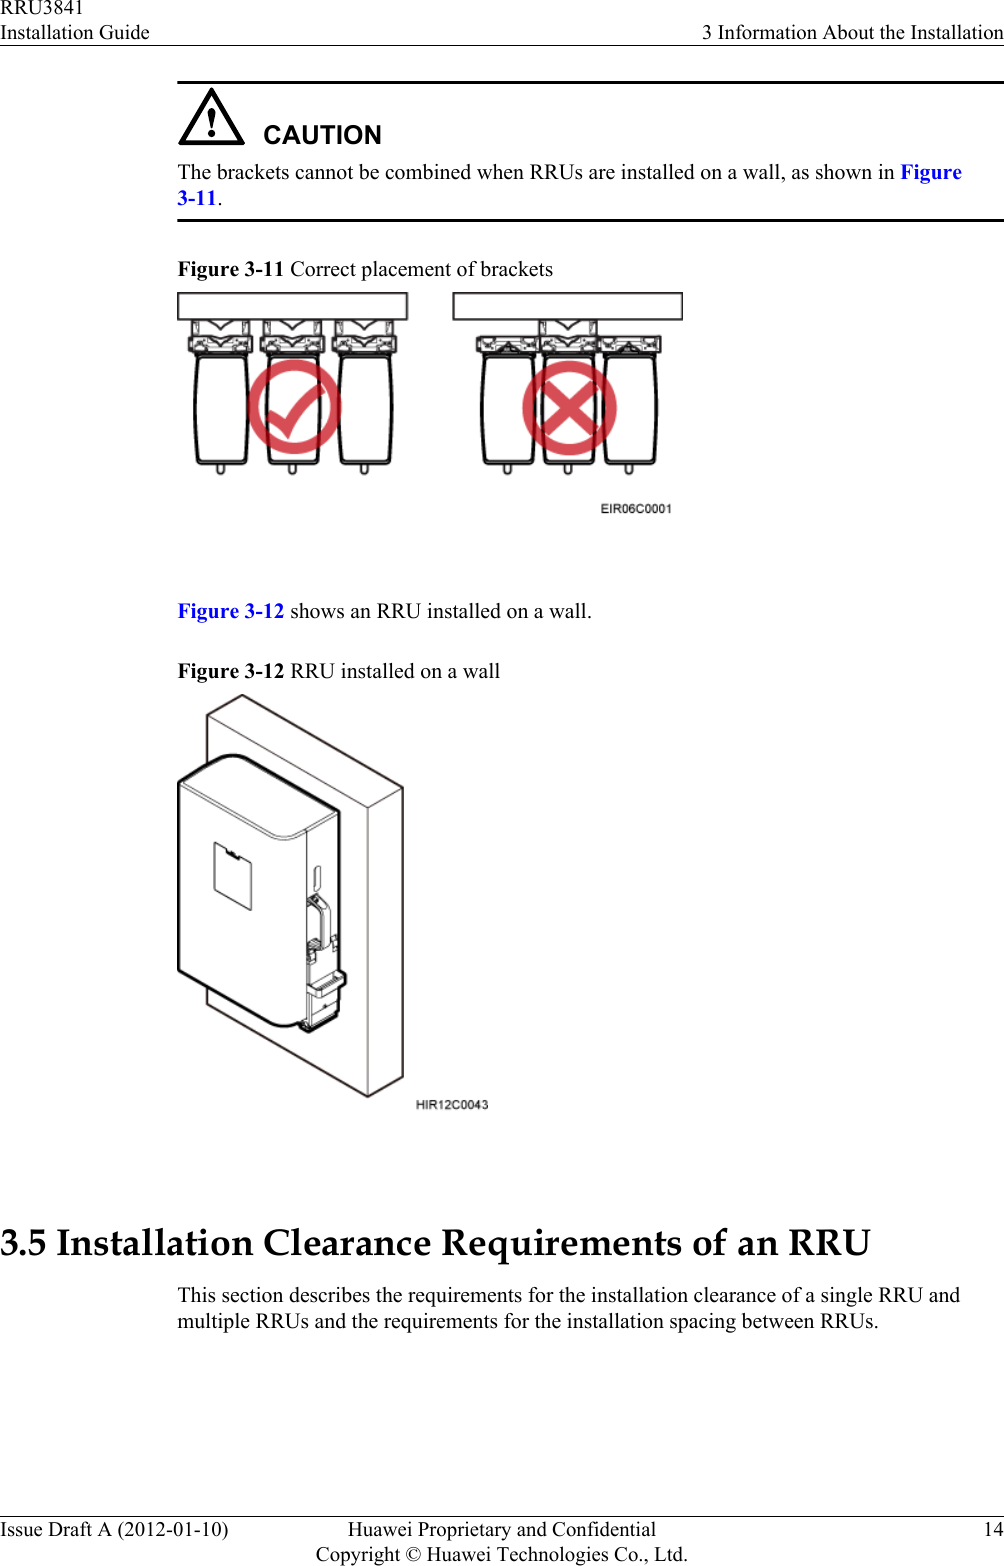 CAUTIONThe brackets cannot be combined when RRUs are installed on a wall, as shown in Figure3-11.Figure 3-11 Correct placement of brackets Figure 3-12 shows an RRU installed on a wall.Figure 3-12 RRU installed on a wall 3.5 Installation Clearance Requirements of an RRUThis section describes the requirements for the installation clearance of a single RRU andmultiple RRUs and the requirements for the installation spacing between RRUs.RRU3841Installation Guide 3 Information About the InstallationIssue Draft A (2012-01-10) Huawei Proprietary and ConfidentialCopyright © Huawei Technologies Co., Ltd.14